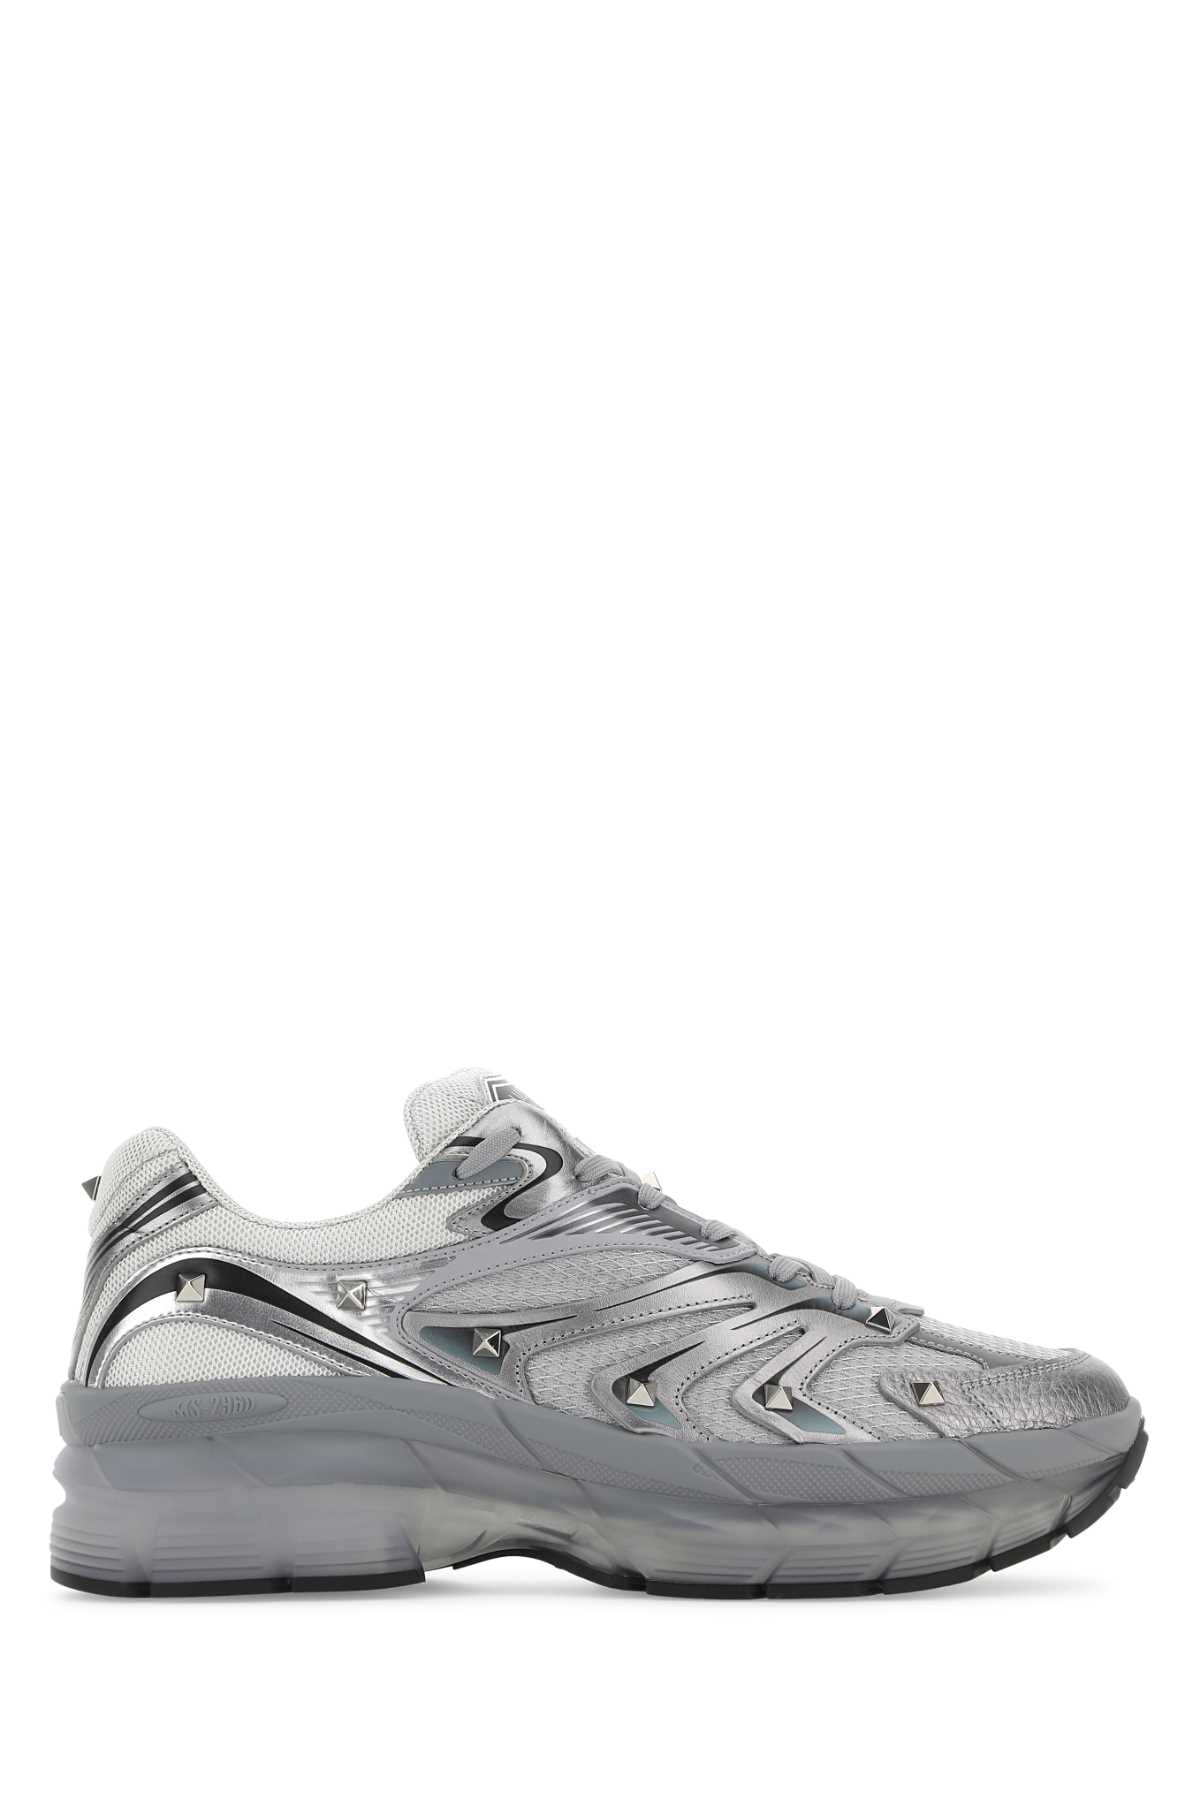 VALENTINO GARAVANI Grey leather and fabric Low-Top MS-2960 sneakers ...